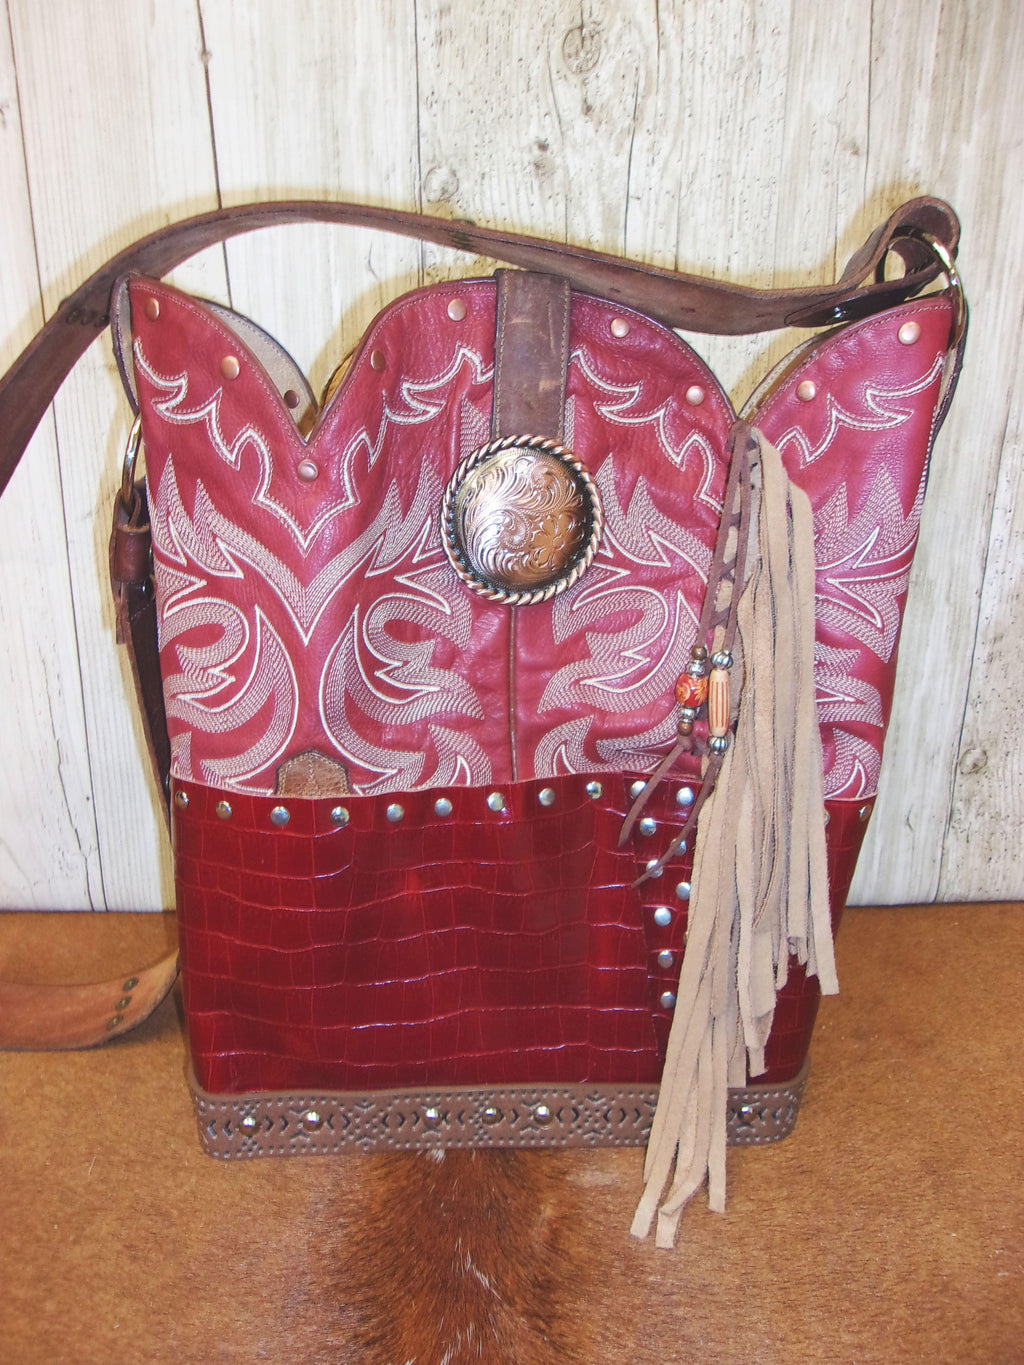 Leather Purse with Fringe - Cowboy Boot Purse with Fringe - Western Shoulder Bag with Fringe TS311 cowboy boot purses, western fringe purse, handmade leather purses, boot purse, handmade western purse, custom leather handbags Chris Thompson Bags